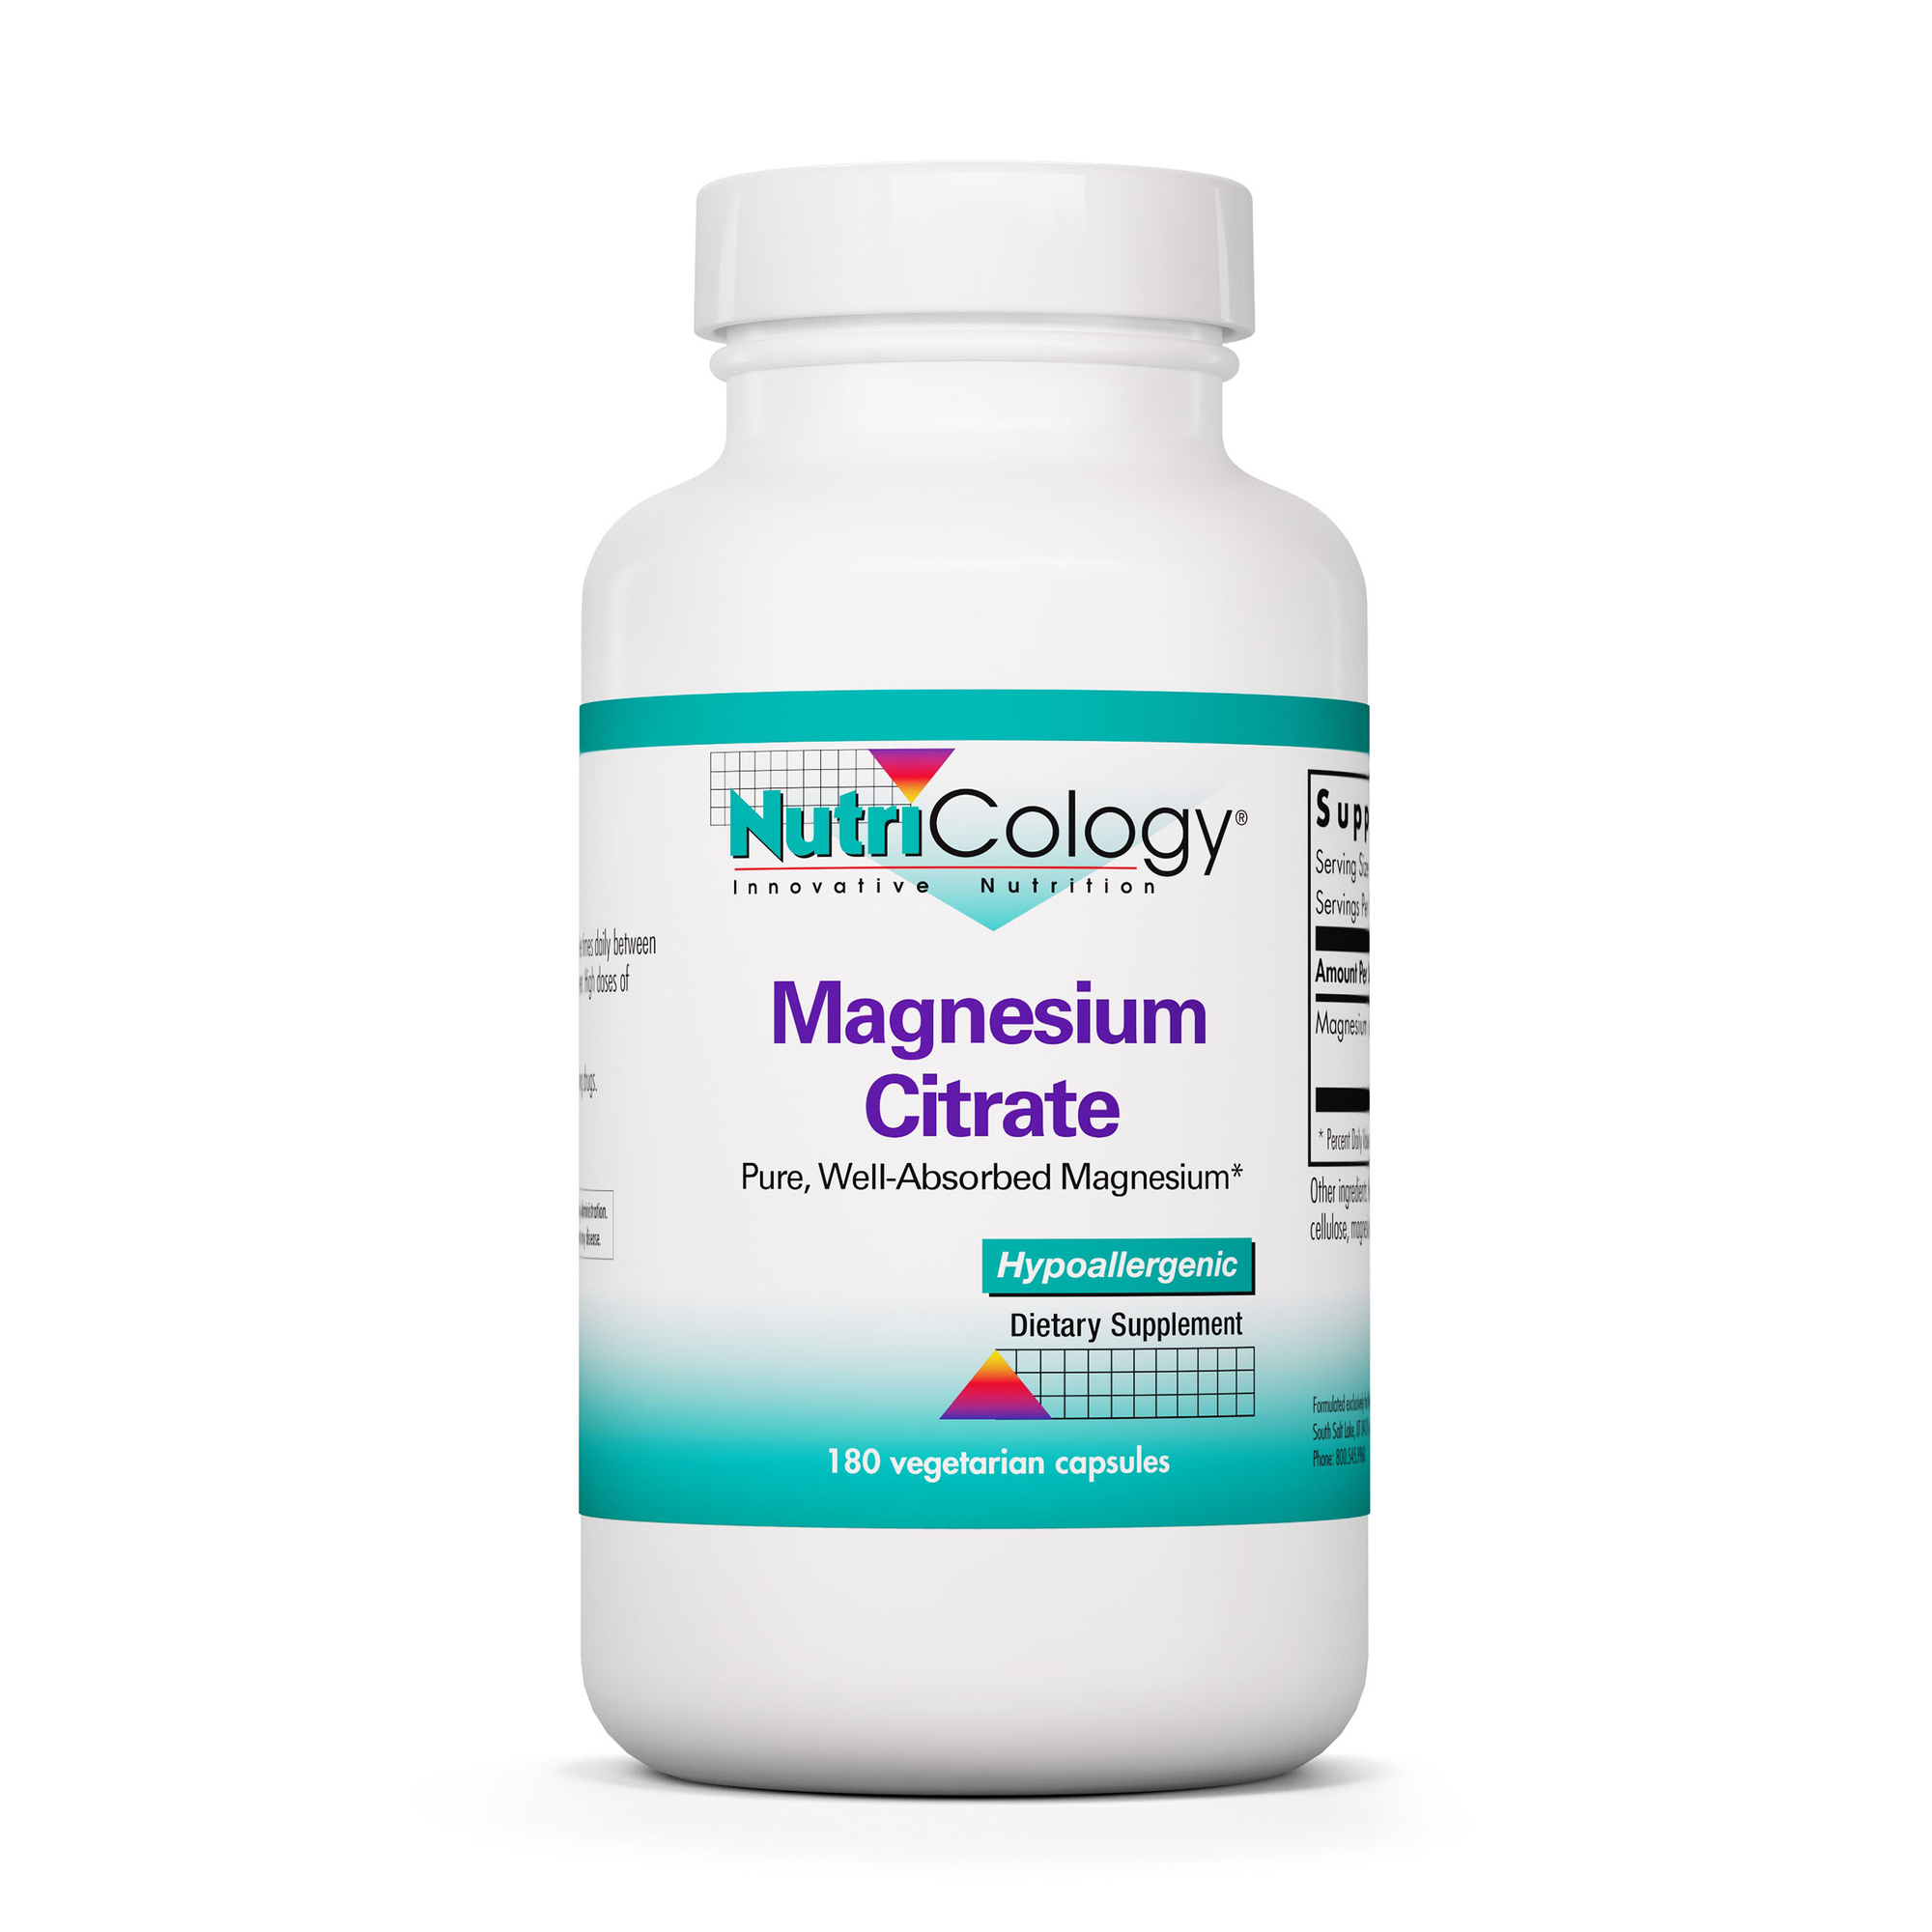 NutriCology Magnesium Citrate - Well-Absorbed, Bone and Stress Support - 180 Vegetarian Capsules - image 1 of 7